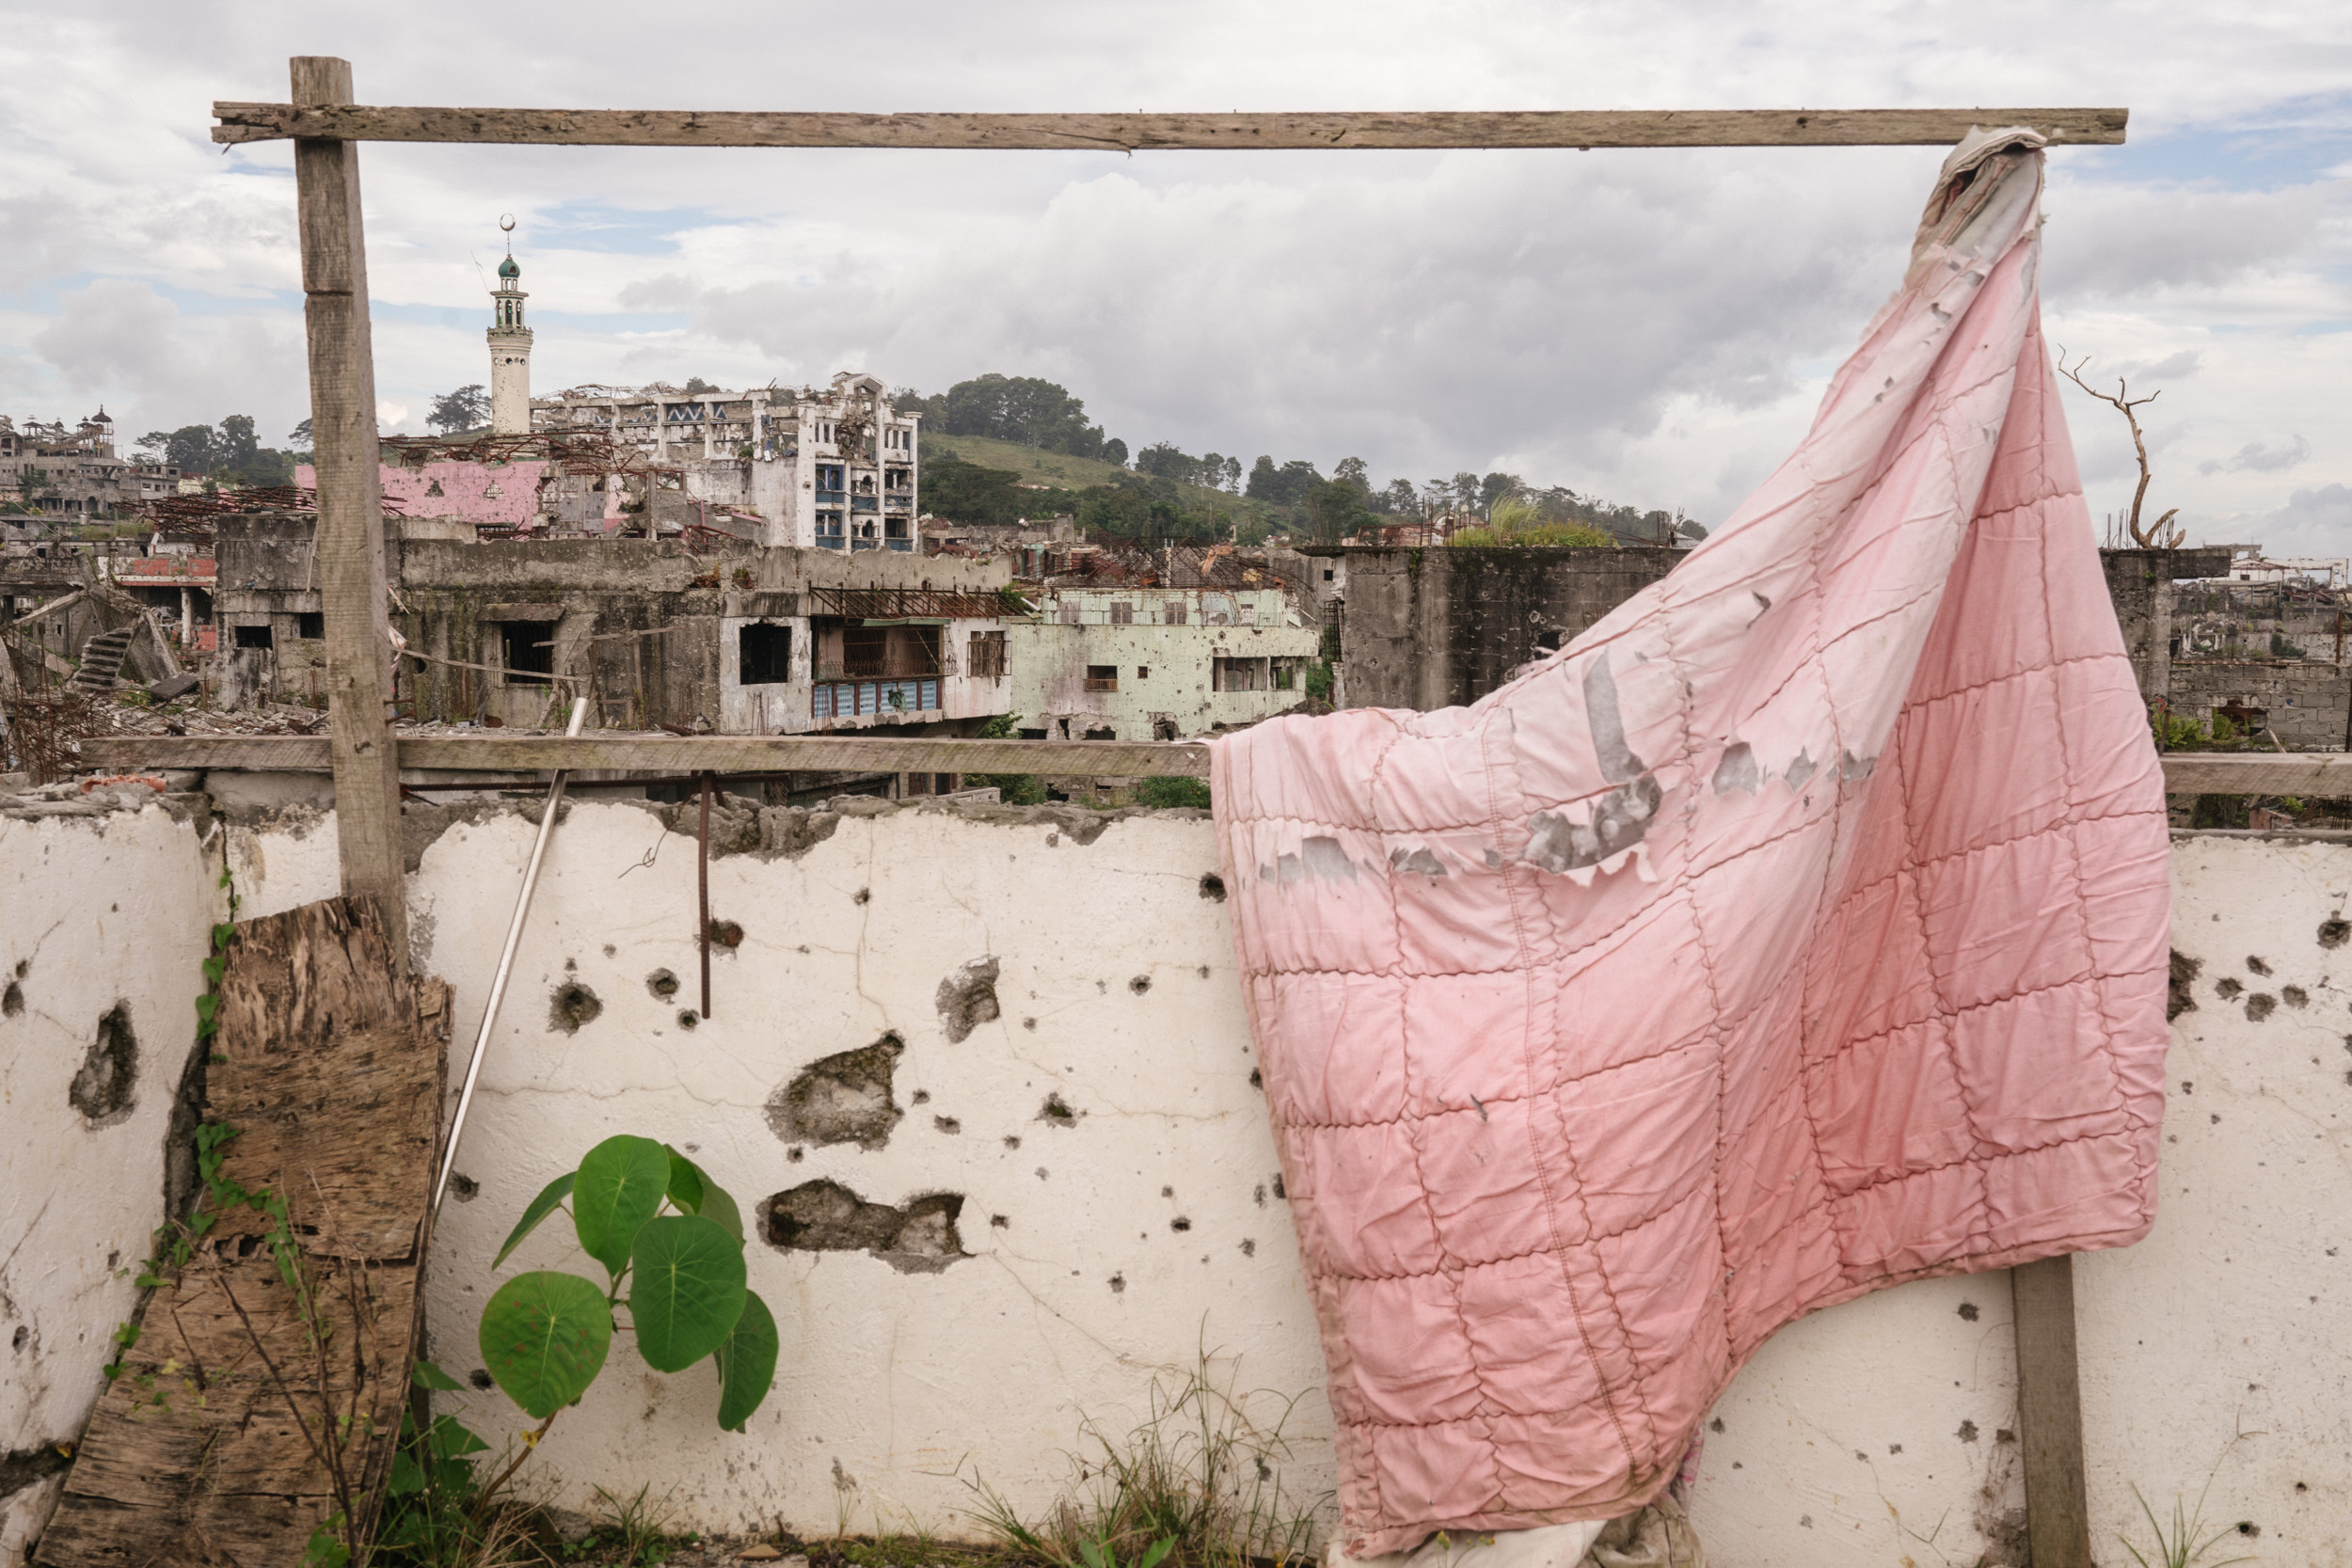  City ruins are seen through a rooftop in the battle area in Marawi City. It has been more than a year since the Philippine military declared the Muslim-majority city of Marawi “liberated” from ISIS-linked militants. But the ravaged city is still wai